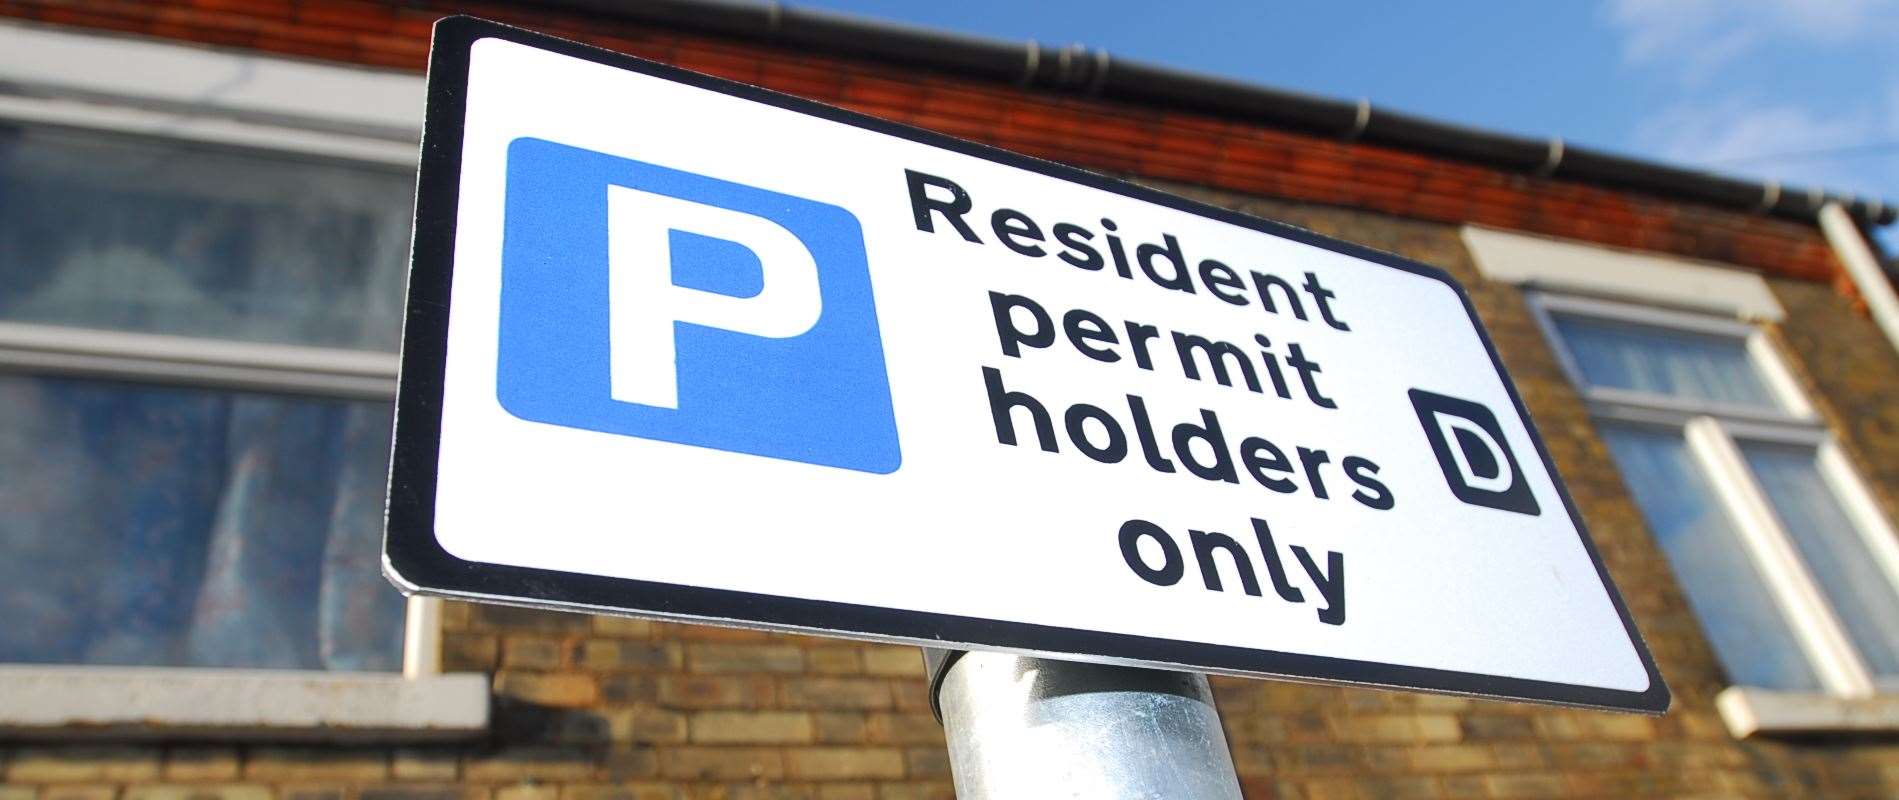 Parking restrictions have been temporarily eased in Maidstone